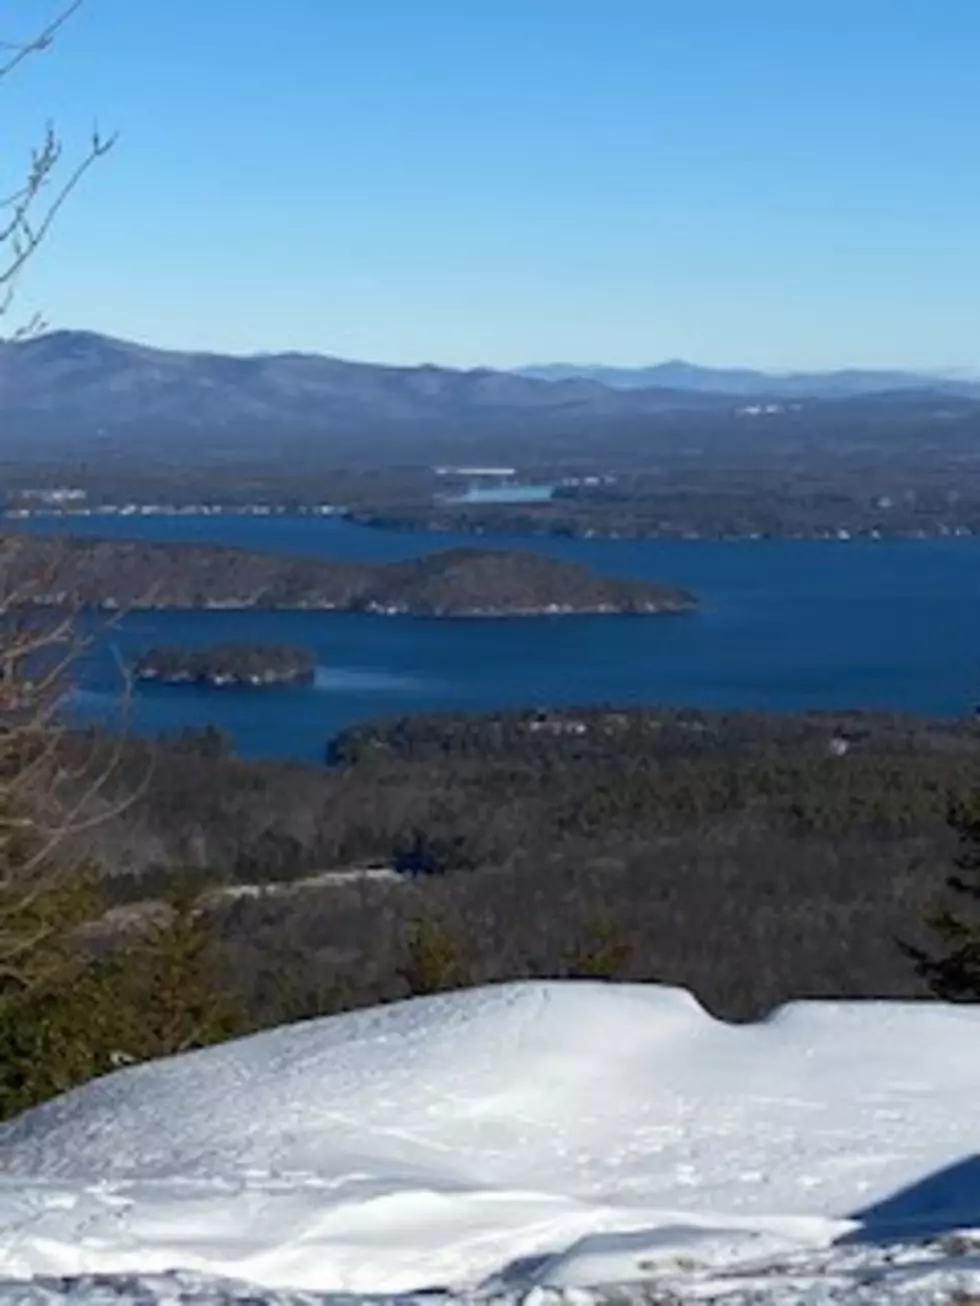 Looking for a Great Hike? Try Mt. Major for Astounding Views